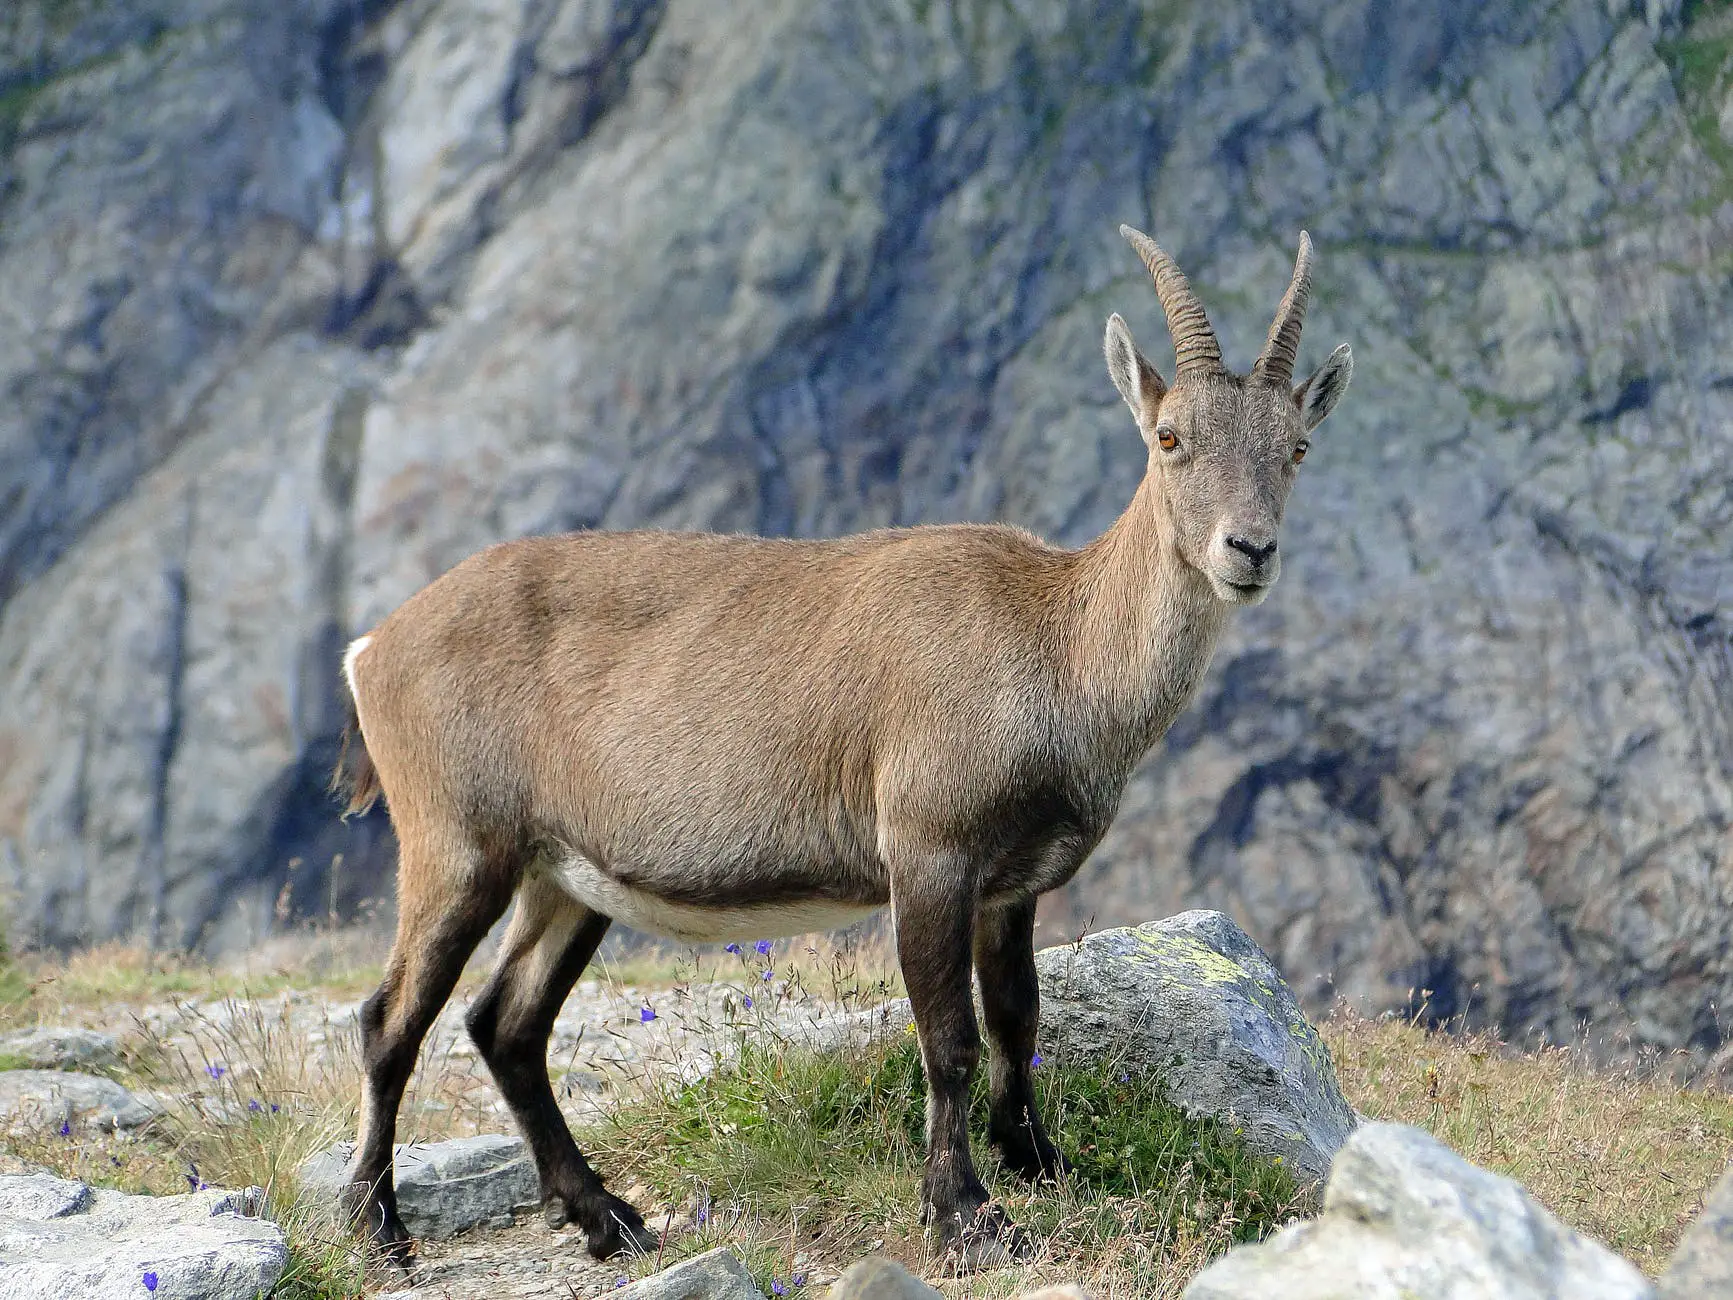 photograph of an ibex with long horns